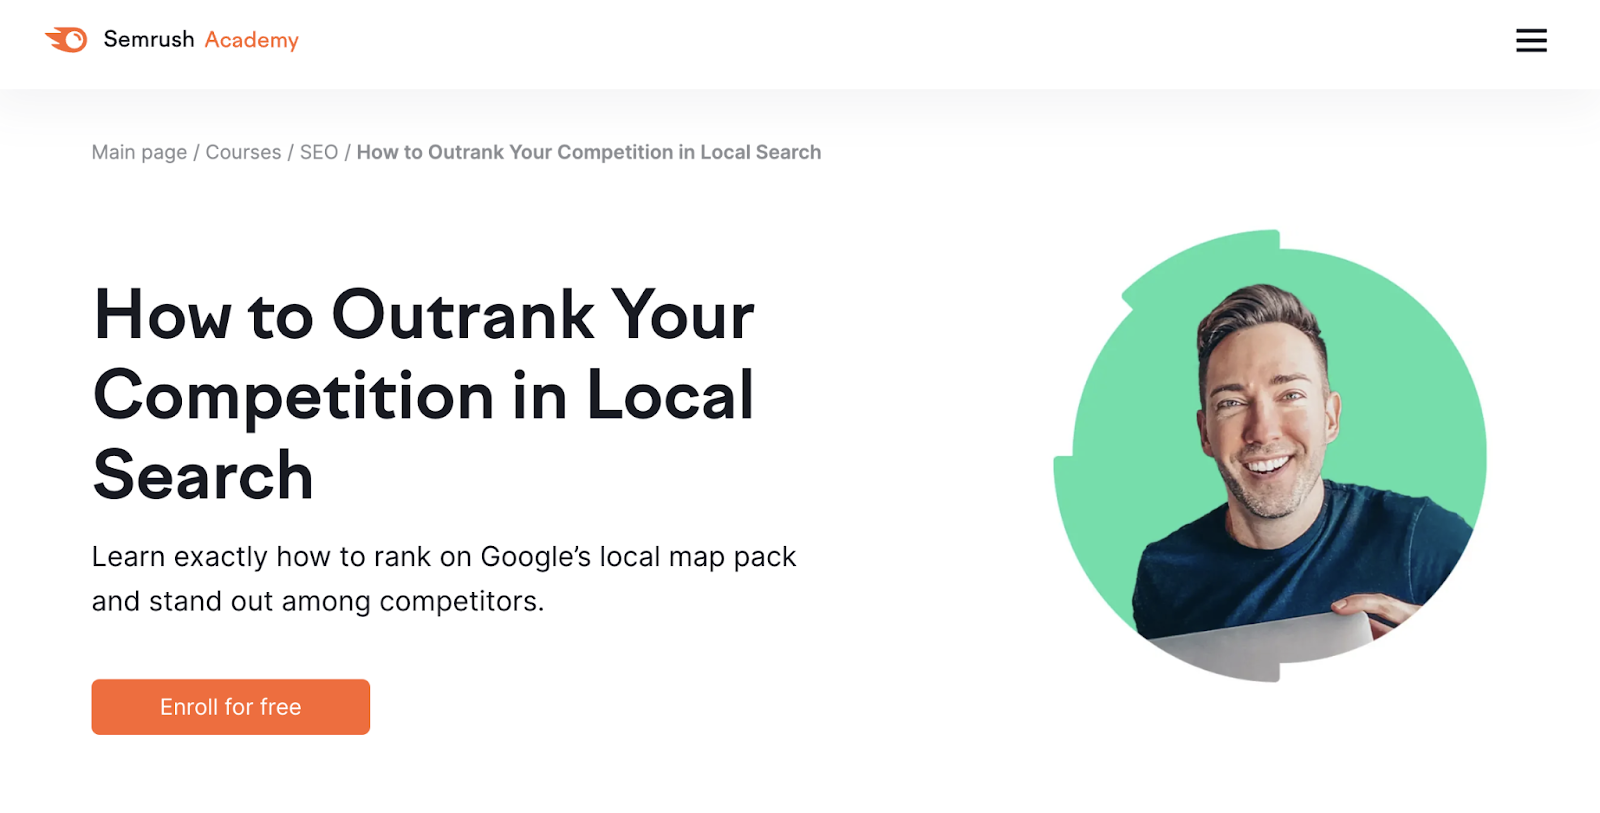 How to Outrank Your Competition successful  Local Search course